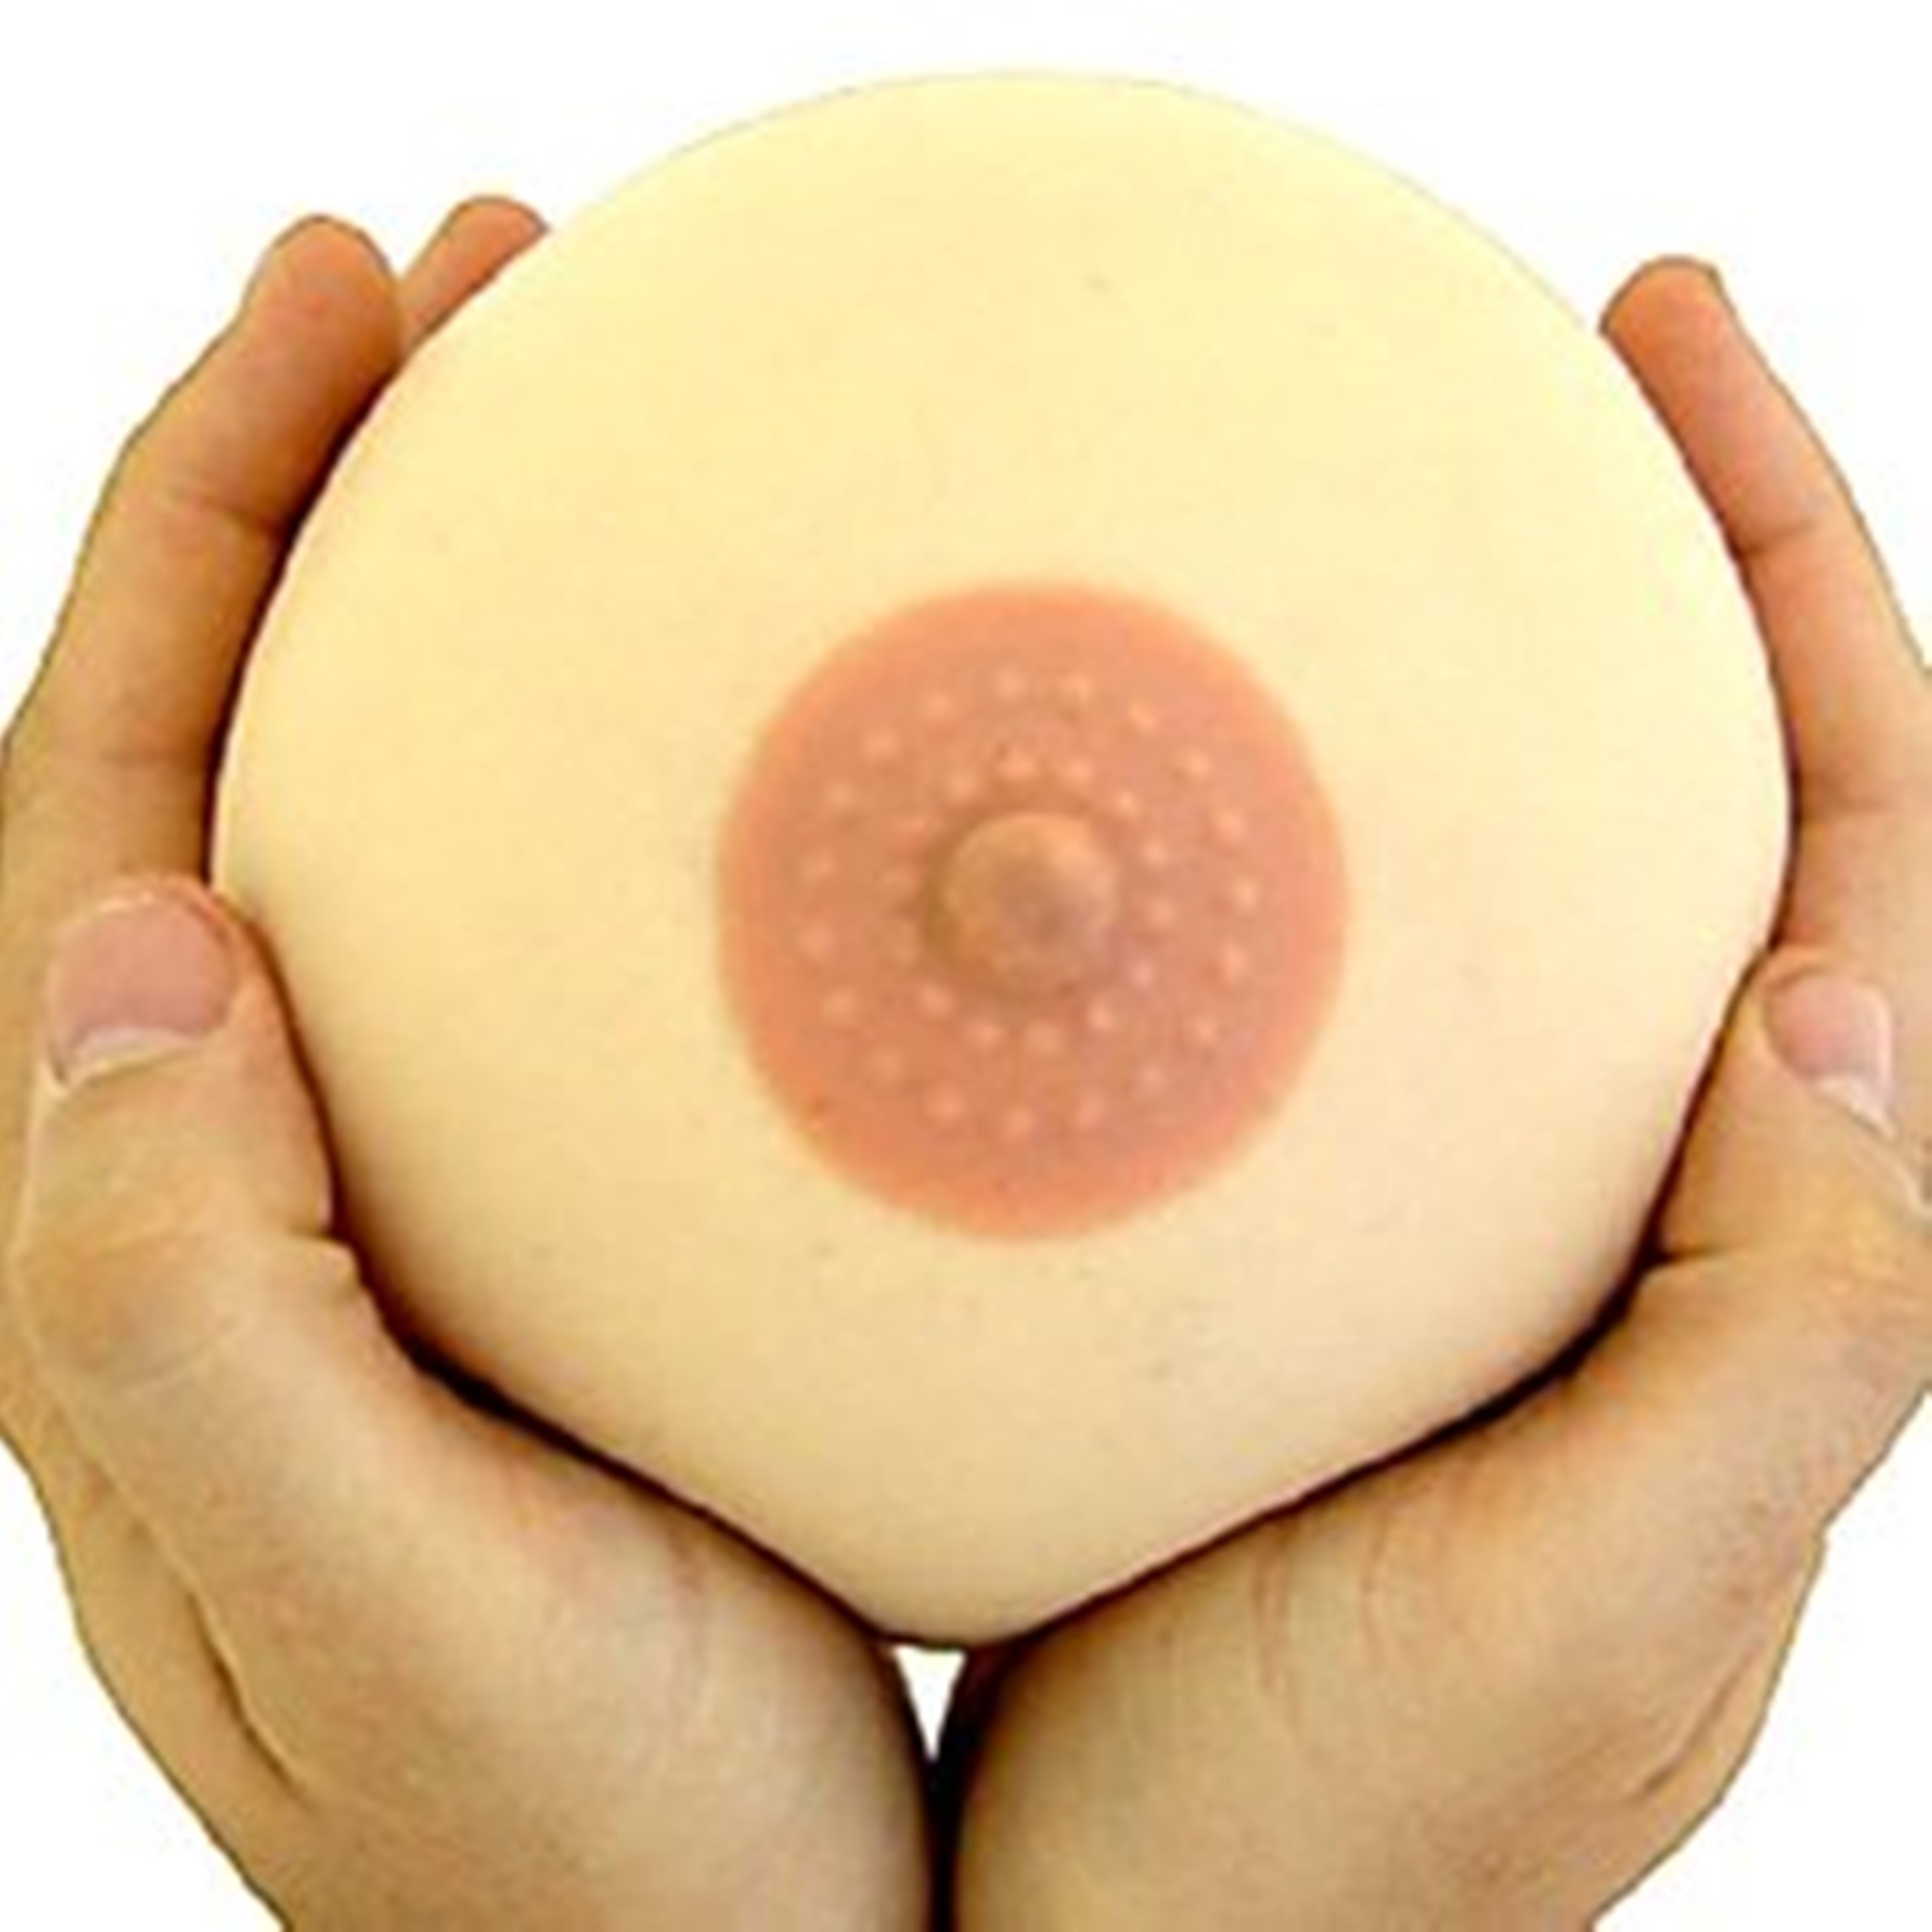 AVN Breast Stress Reliever 2 Balls Round Boob Squishy Anxiety Relief